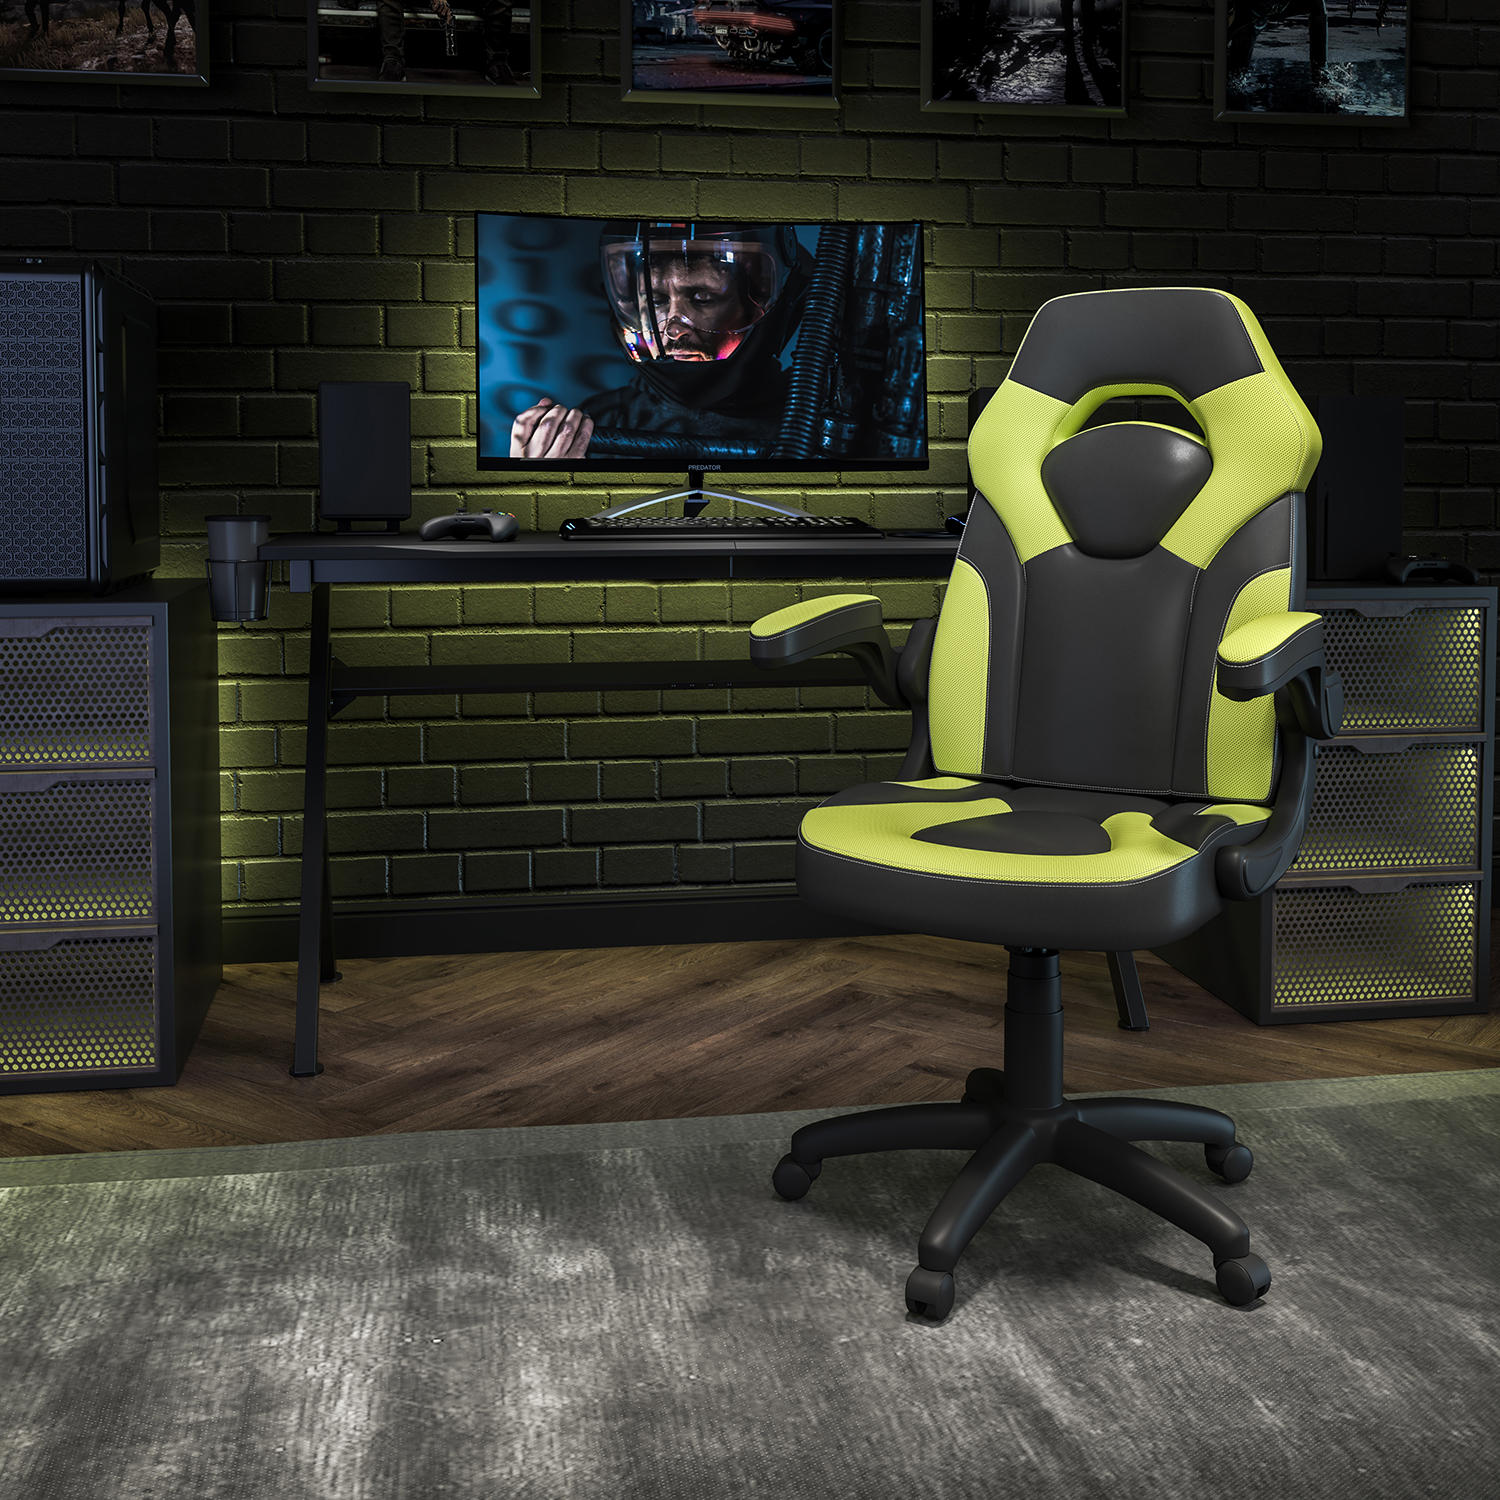 X10 Gaming Chair Racing Office Ergonomic Computer PC Adjustable Swivel Chair with Flip-up Arms, Neon Green/Black